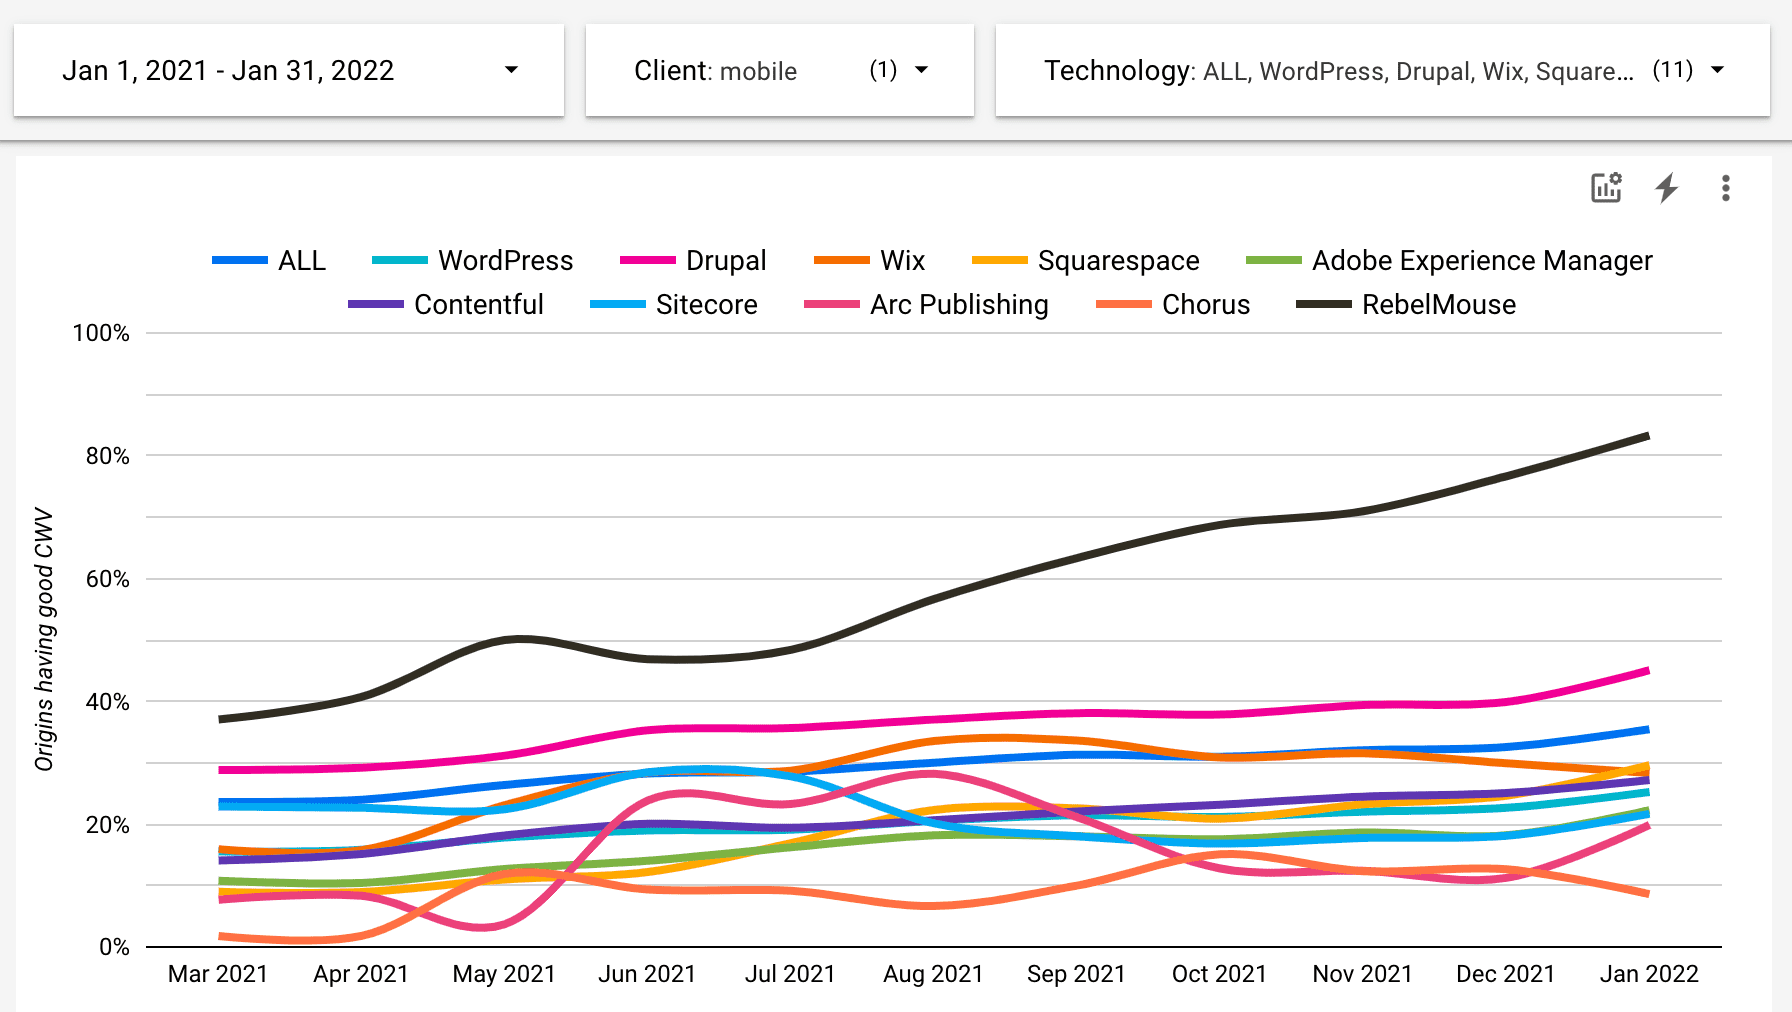 A comparison of origins having good Core Web Vitals across platforms. The platforms are RebelMouse, WordPress, Drupal, Wix, Squarespace, Adobe Experience Manager, Contentful, Sitecore, Arc Publishing, and Chorus. The time period is from January 1, 2021 to January 31, 2022 for mobile devices. The trend shows that RebelMouse outperforms all other CMS platforms on Core Web Vitals, and this trend increases over time.